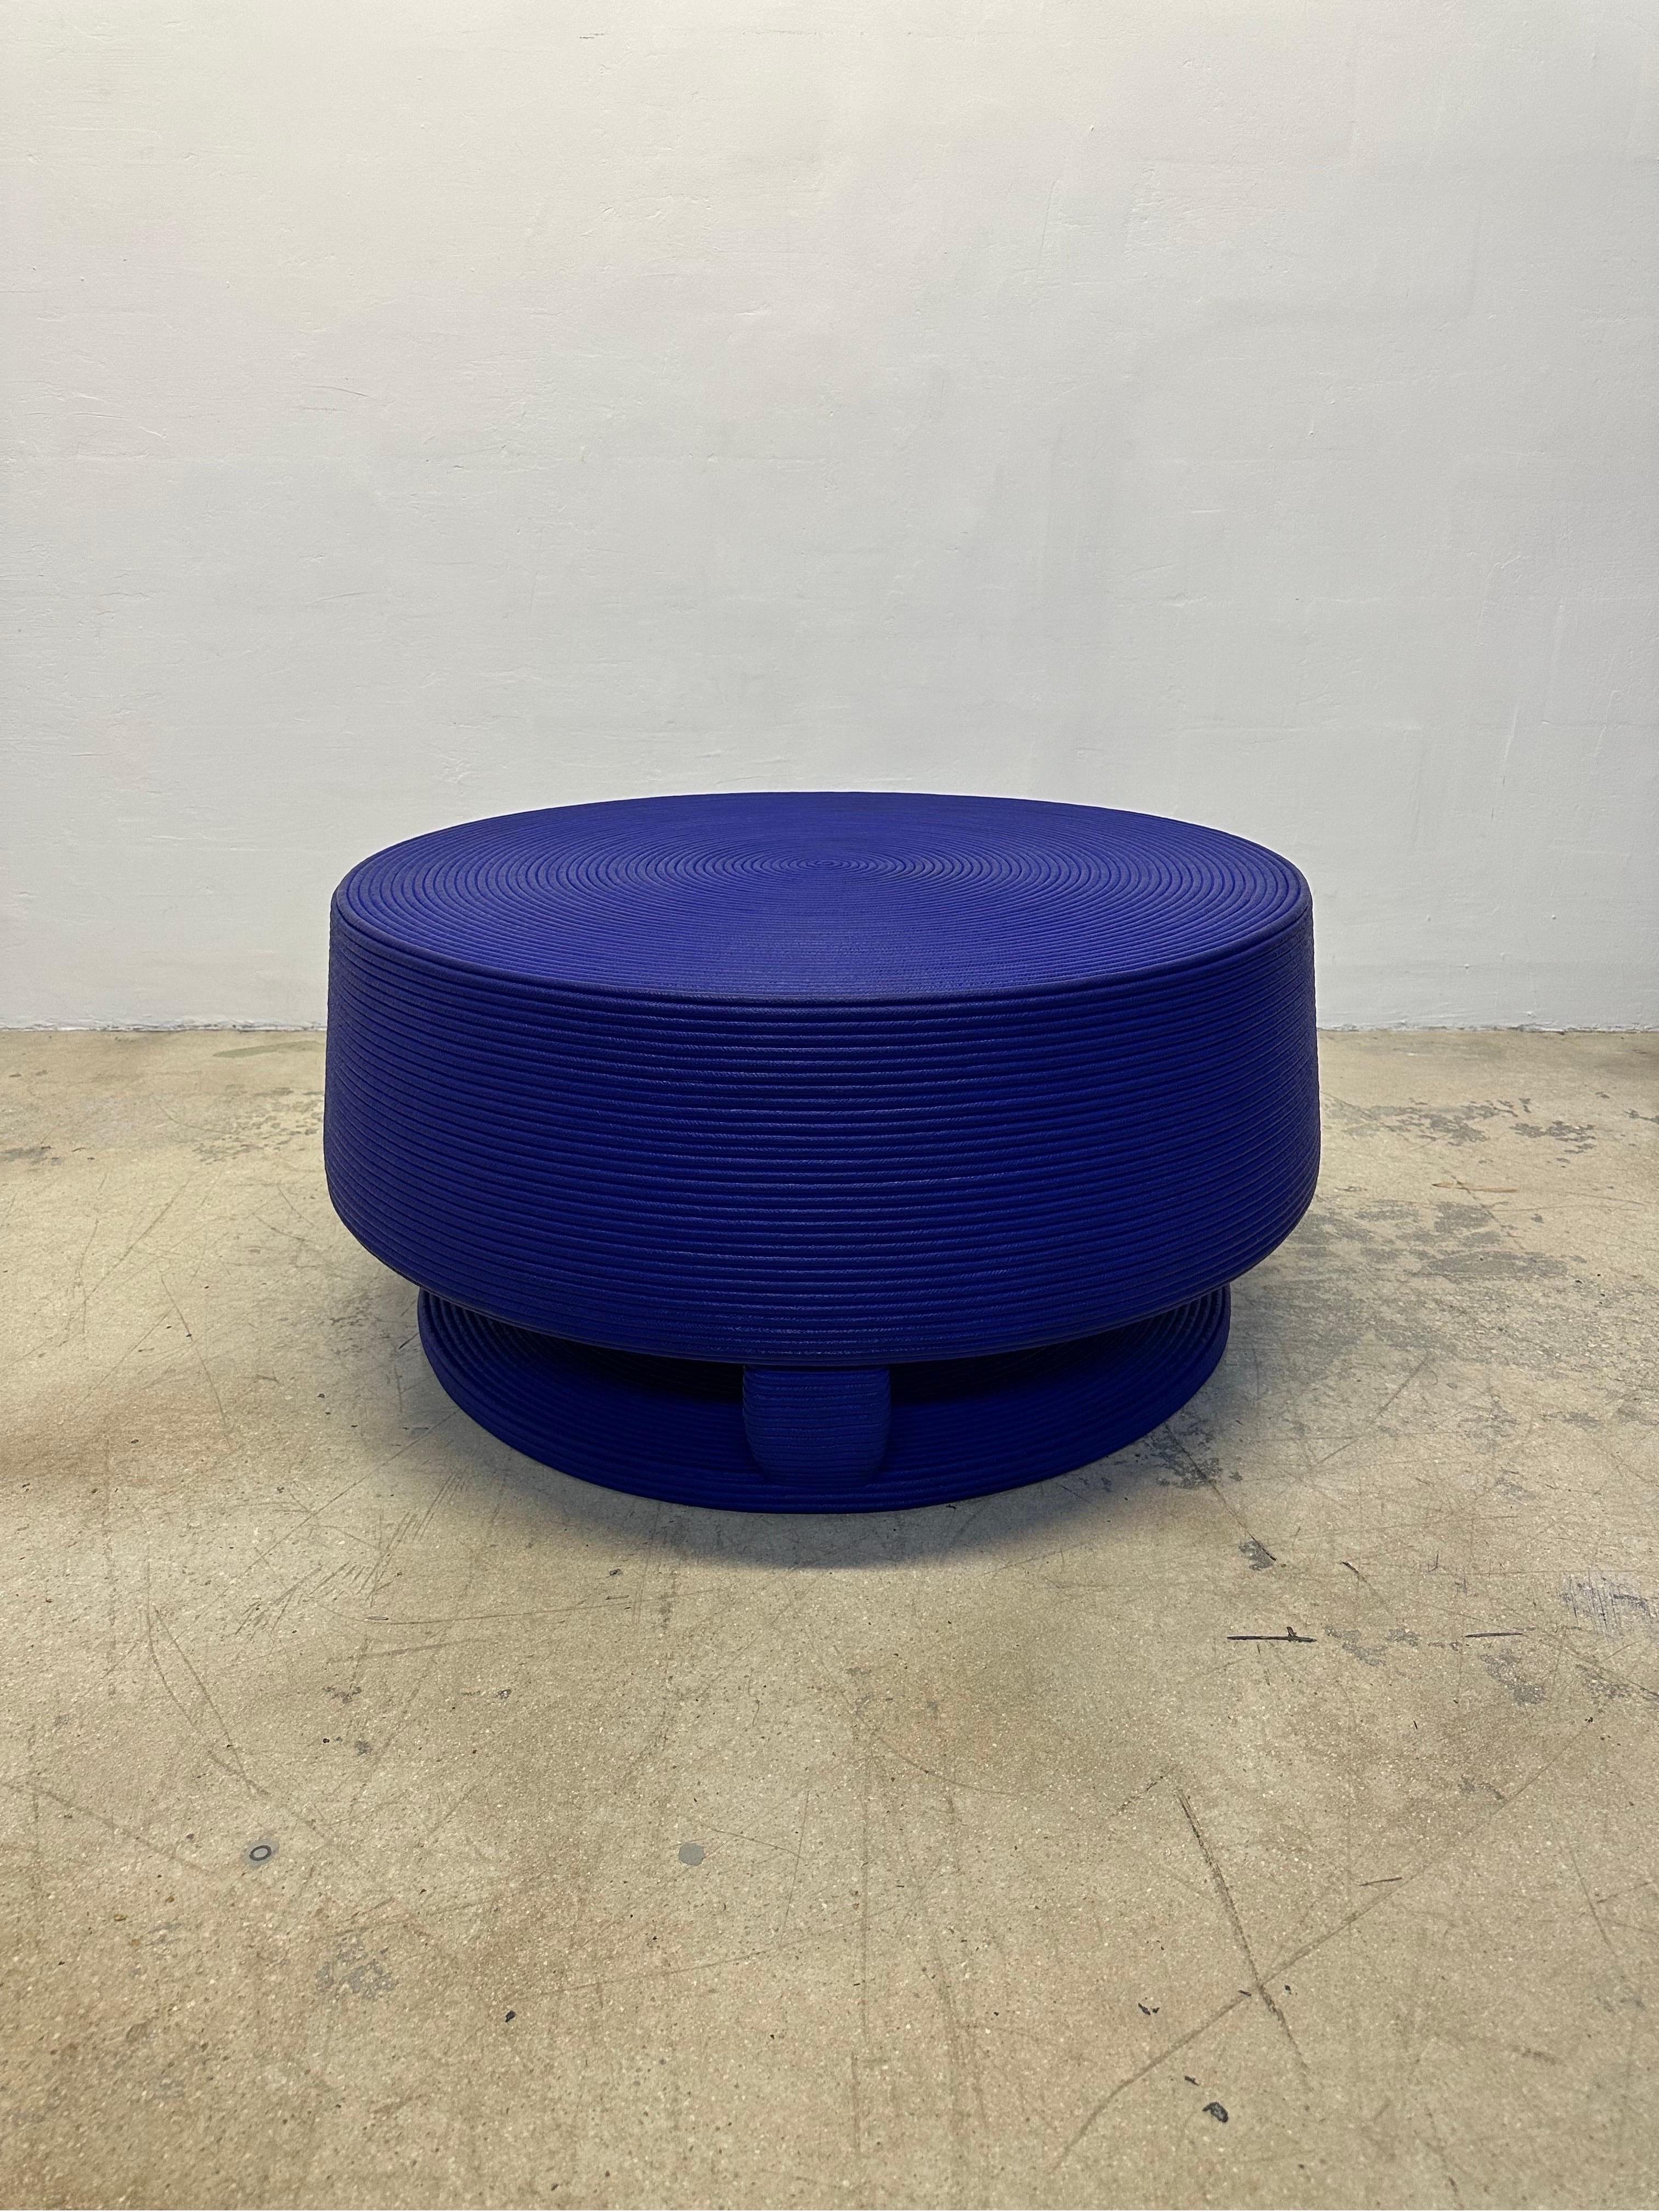 Christian Astuguevieille Afritamu Coffee Table With Yves Klein Blue Finish In Good Condition For Sale In Miami, FL